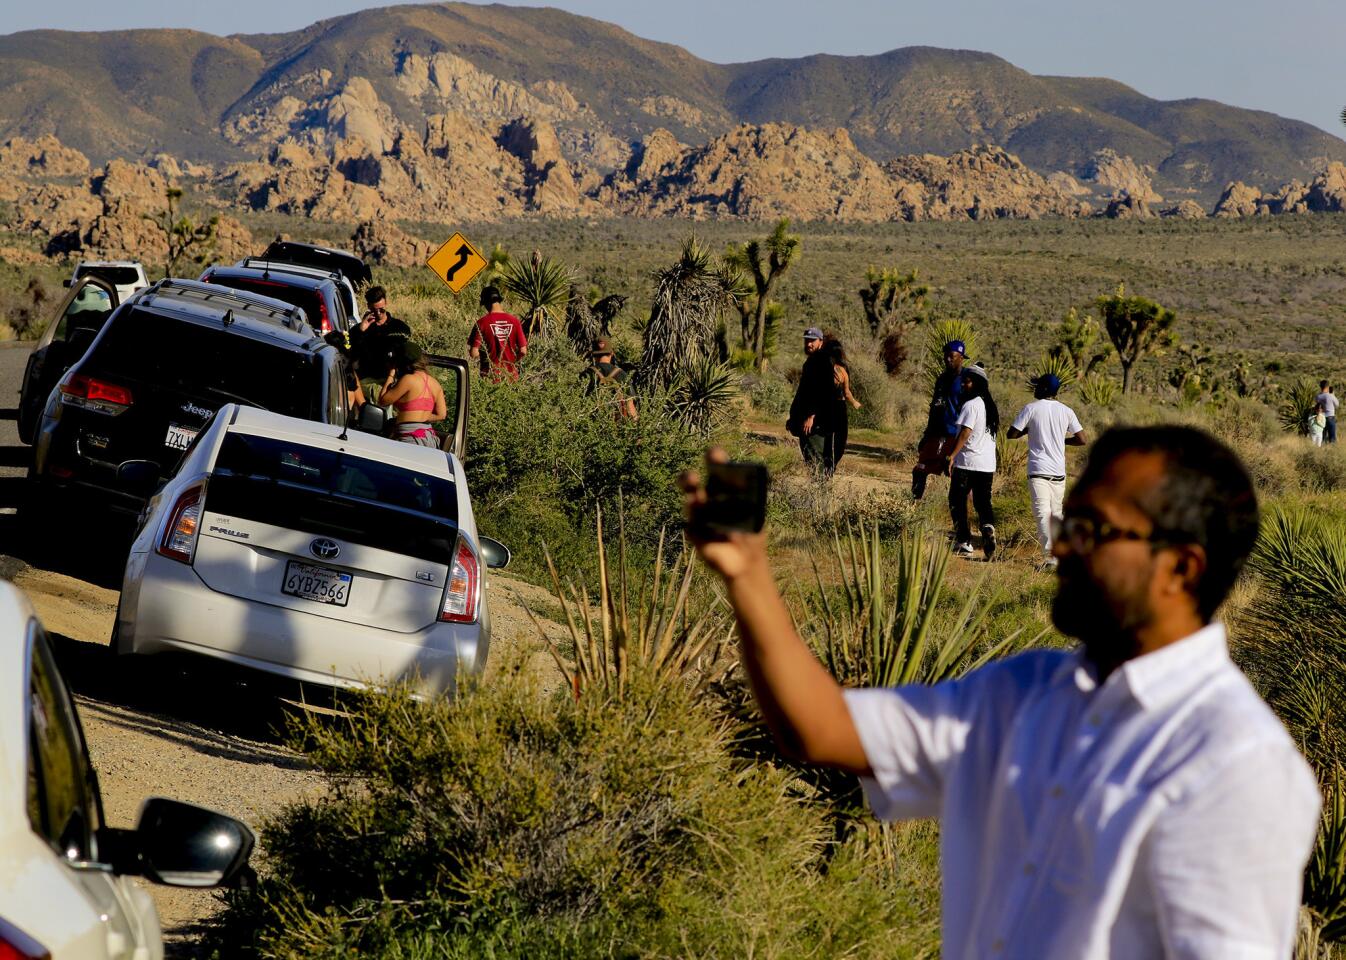 Selfies and traffic jams seem to go together along Park Boulevard on a busy Saturday afternoon in Joshua Tree National Park.